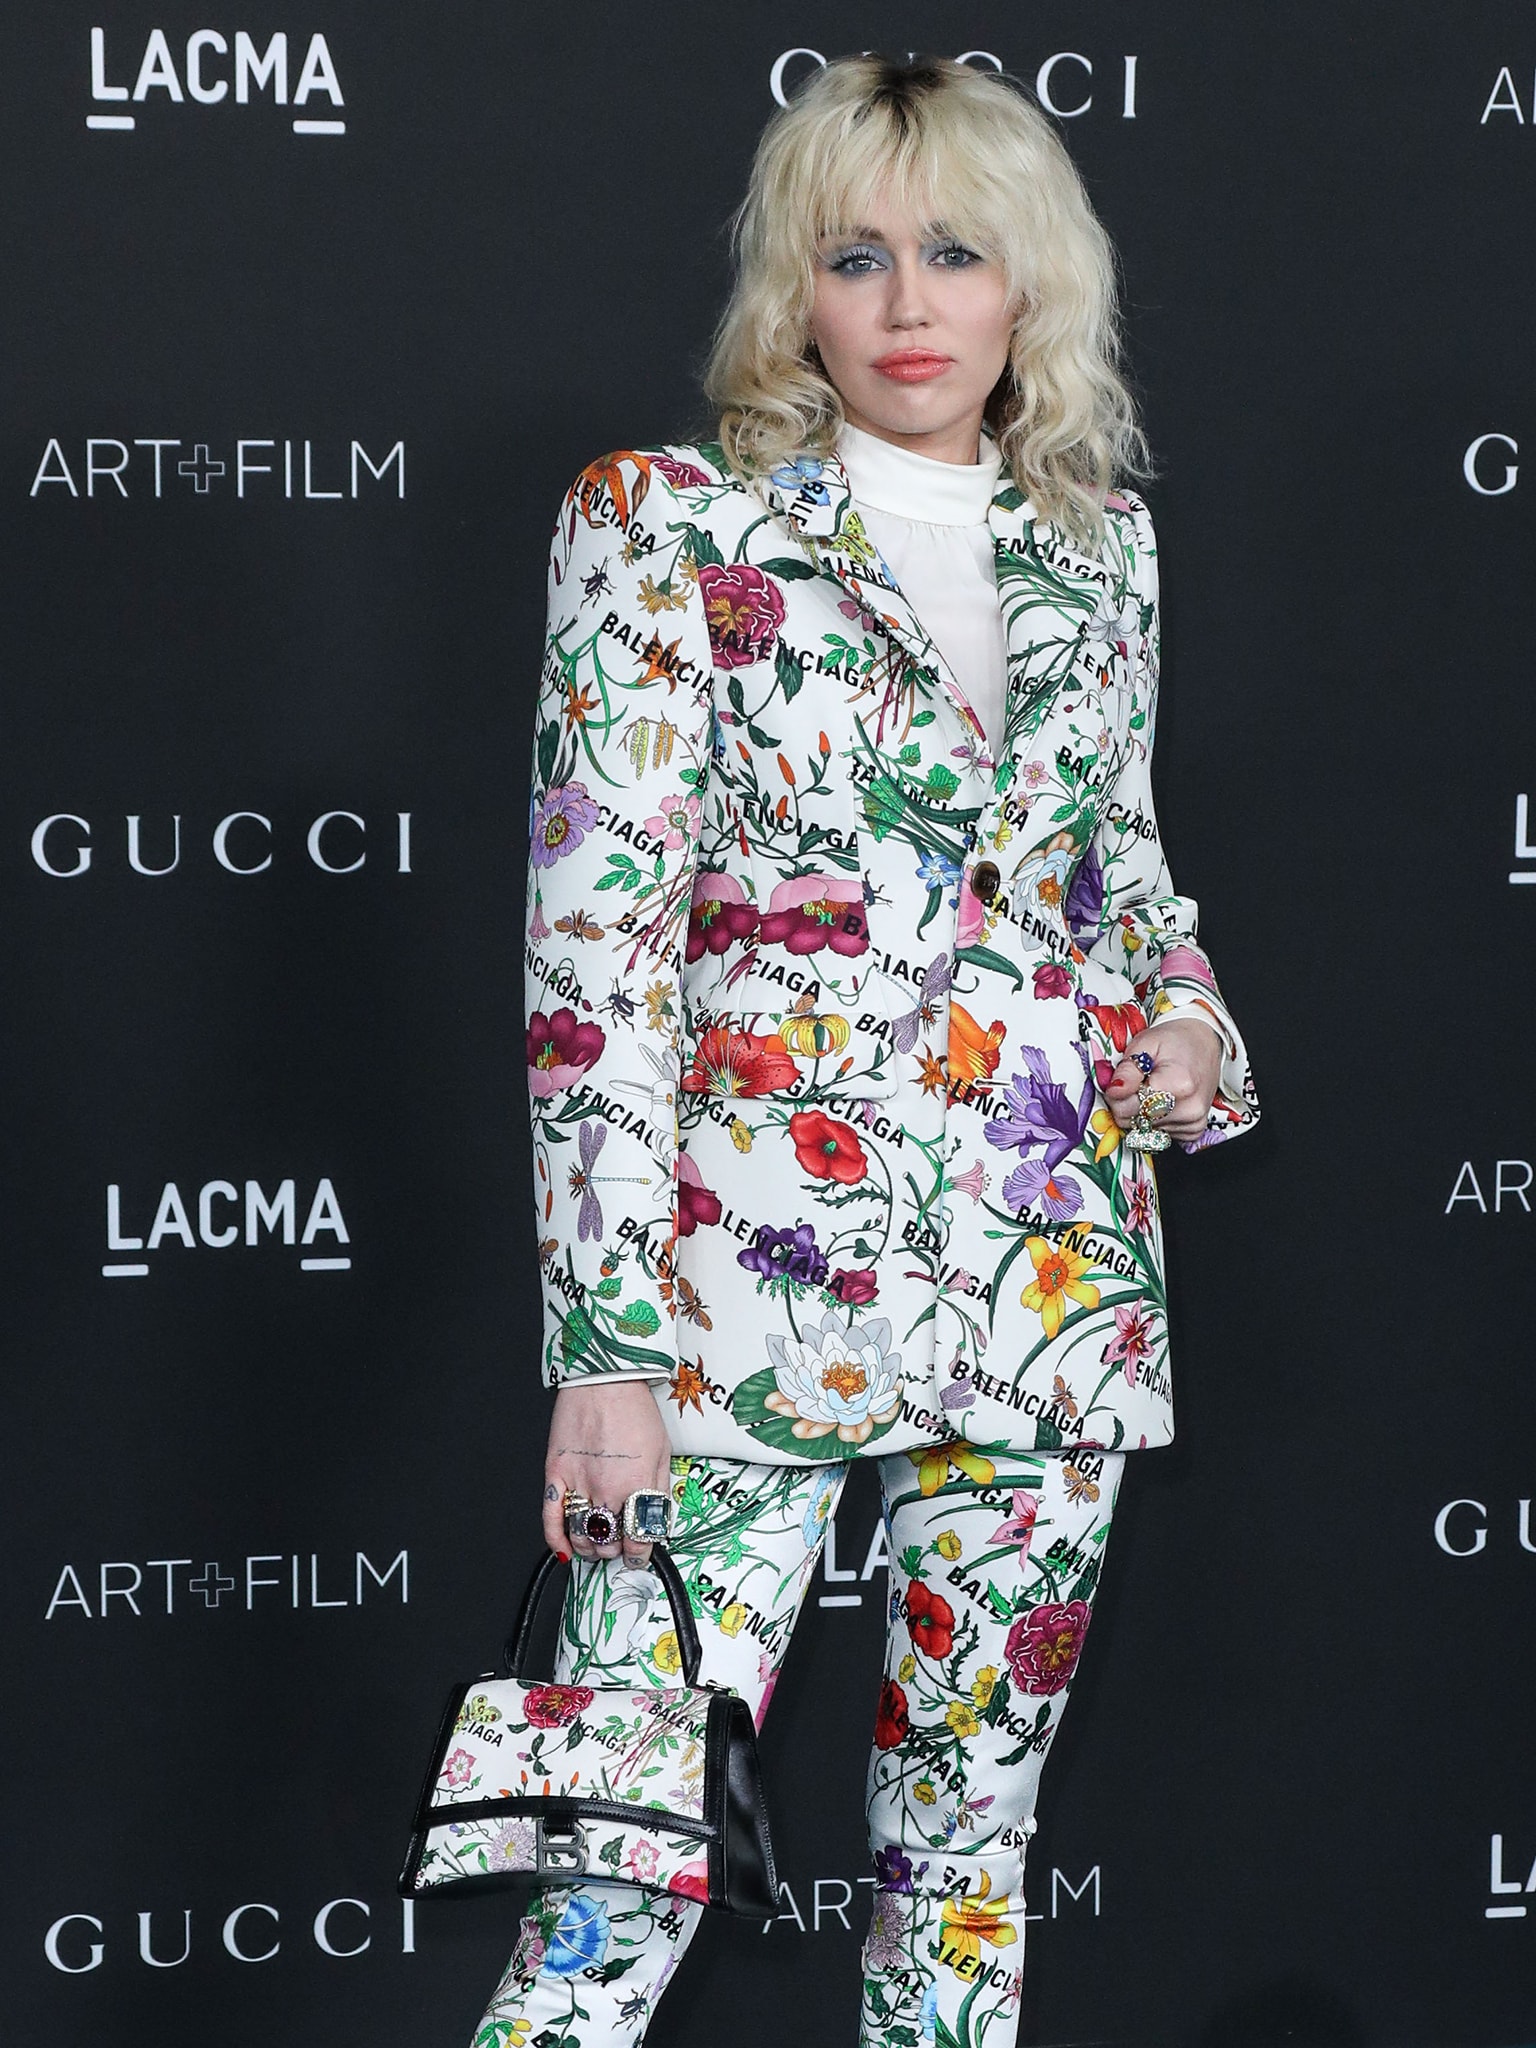 Miley Cyrus styles her look with a matching handbag and a slew of large statement rings